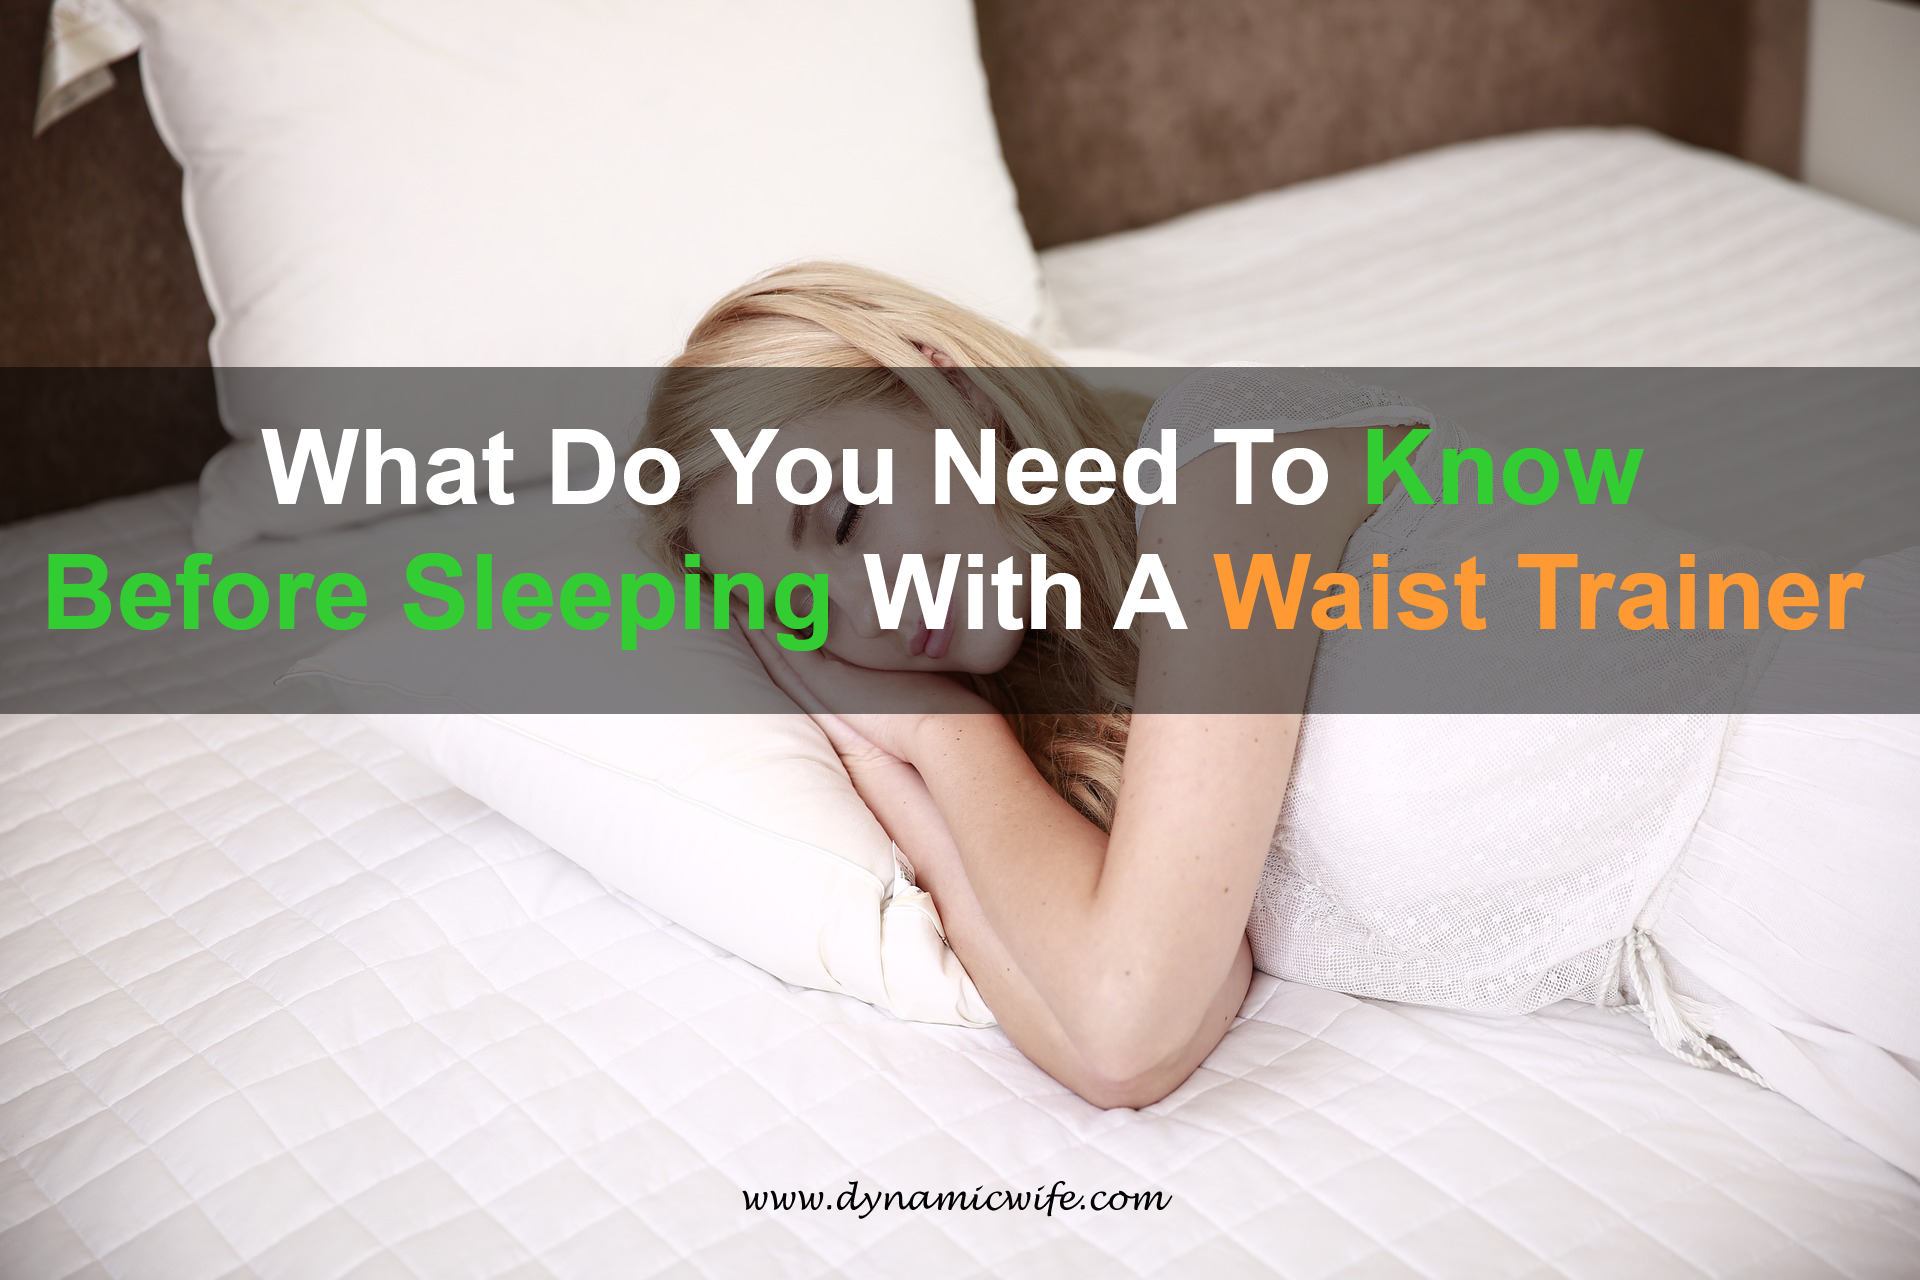 What Do You Need to Know before Sleeping With a Waist Trainer on